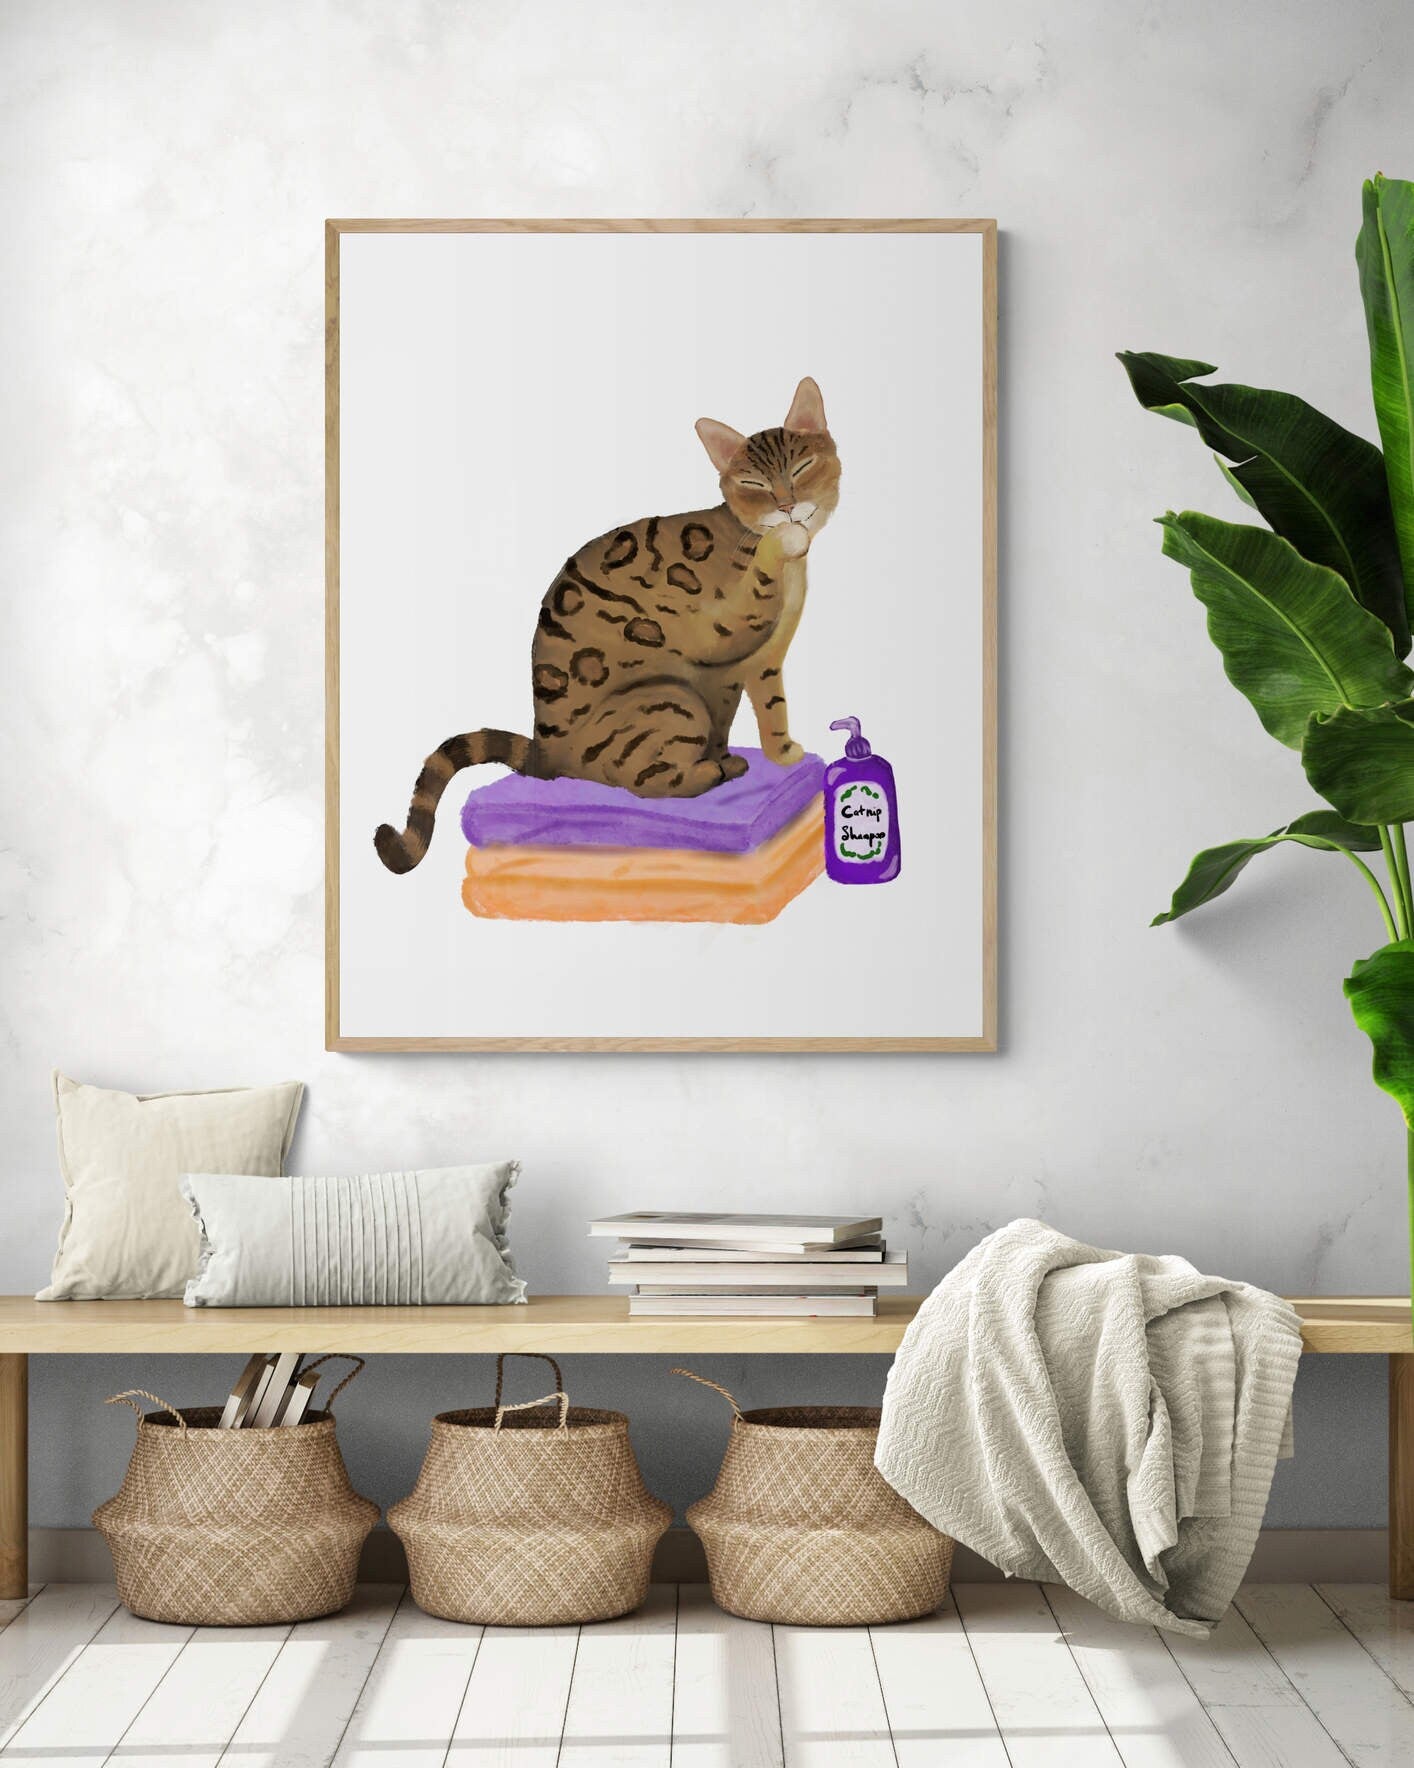 Gold Bengal Cat on Laundry Print, Bengal Cat Sitting on Folded Linens, Laundry Wall Art, Cat Illustration, Home Decor, Cat Memorial